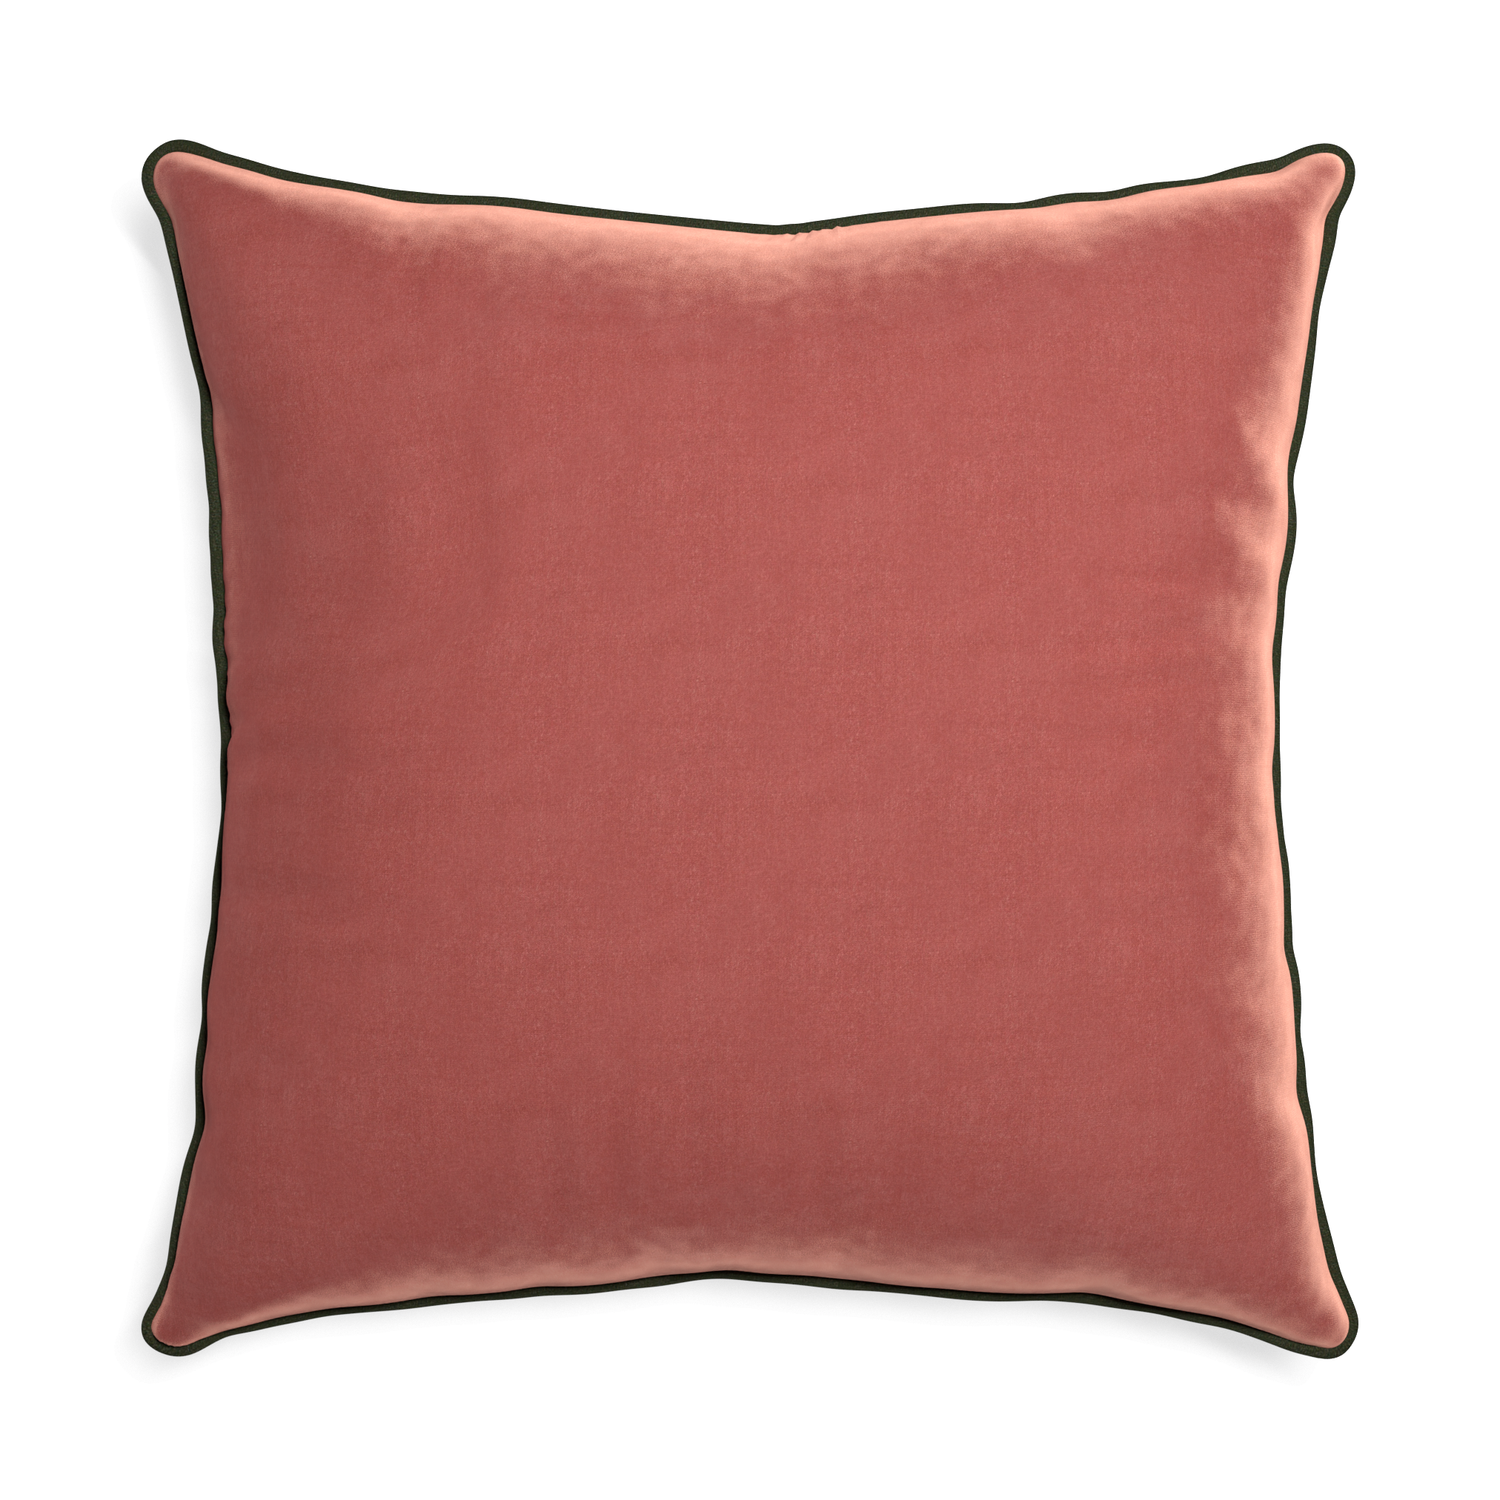 Euro-sham cosmo velvet custom pillow with f piping on white background